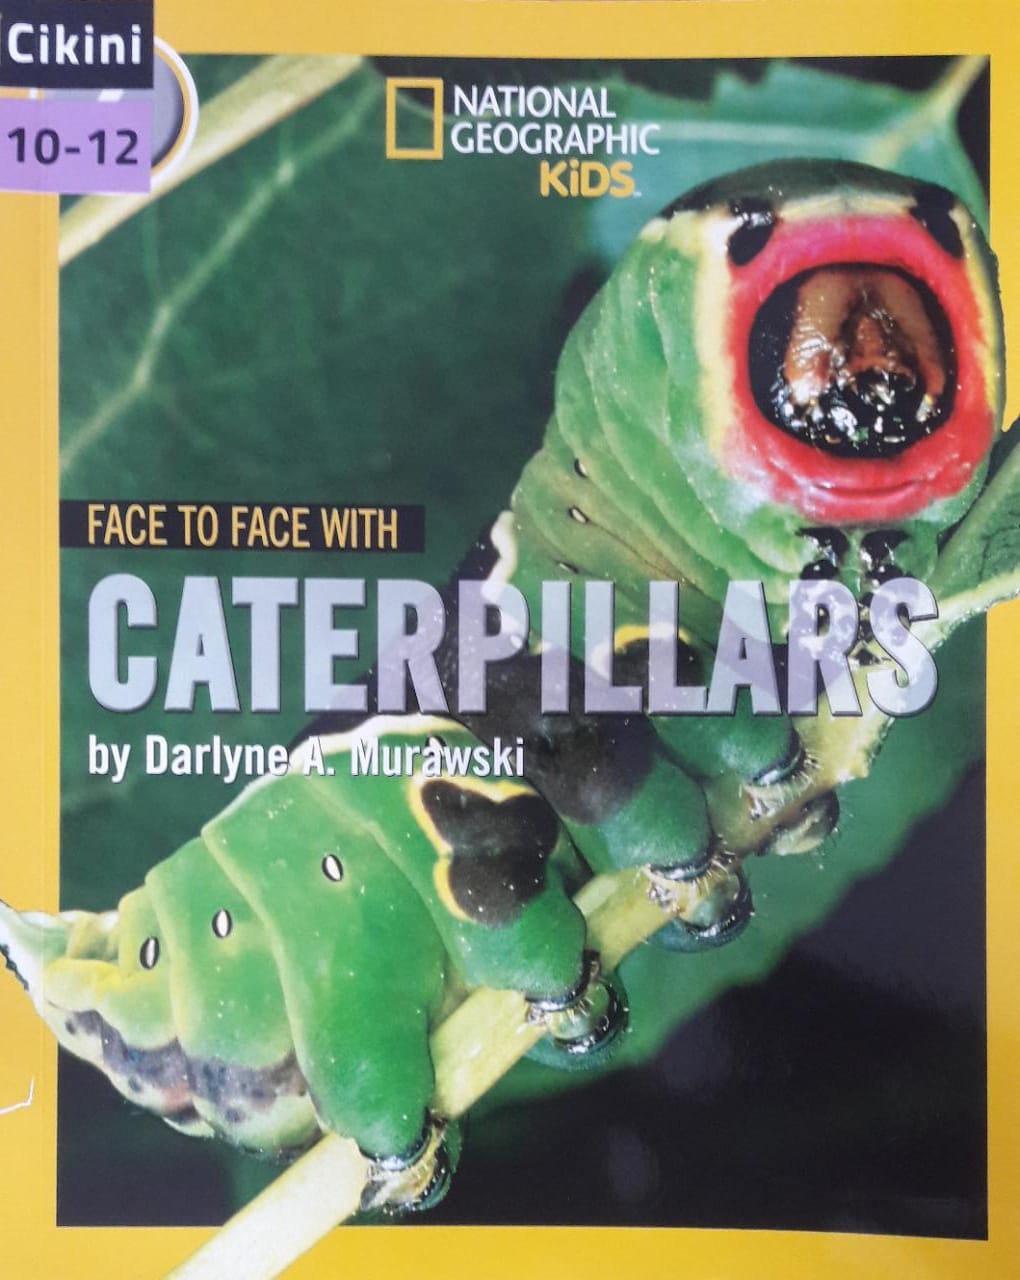 National geographic kids : face to face with caterpillars